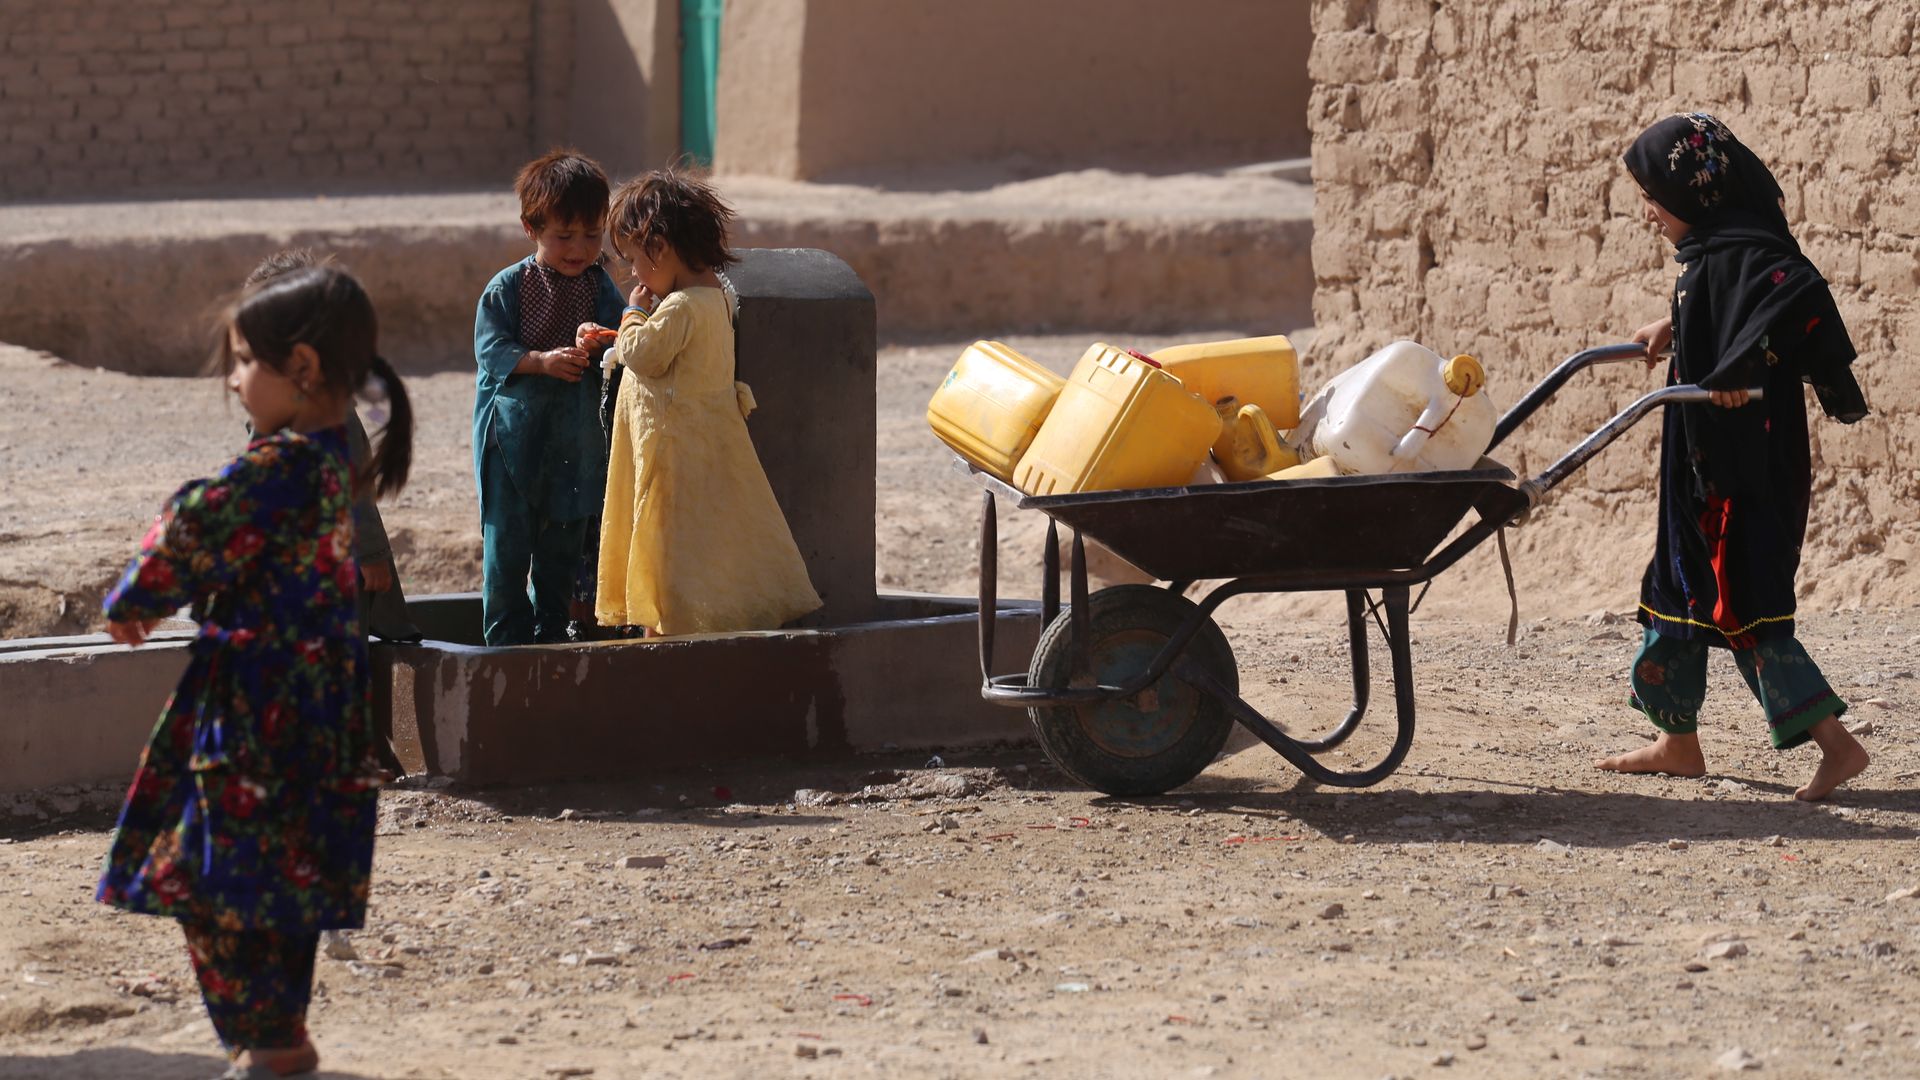 small children in a refugee camp, one pushing a wheelbarrow with empty plastic jugs